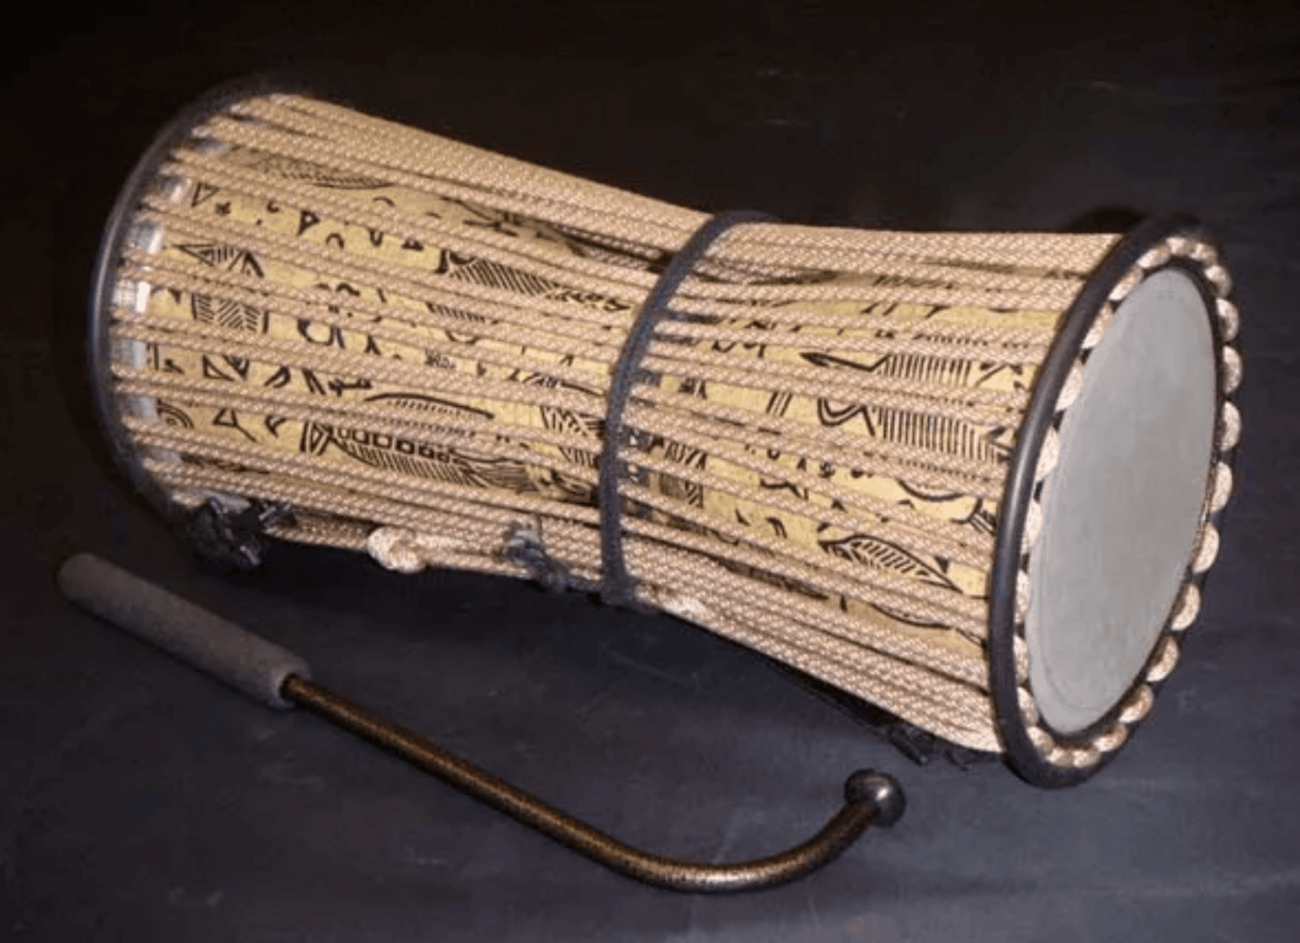 The Nigerian Talking Drum: An ancient but evergreen musical instrument